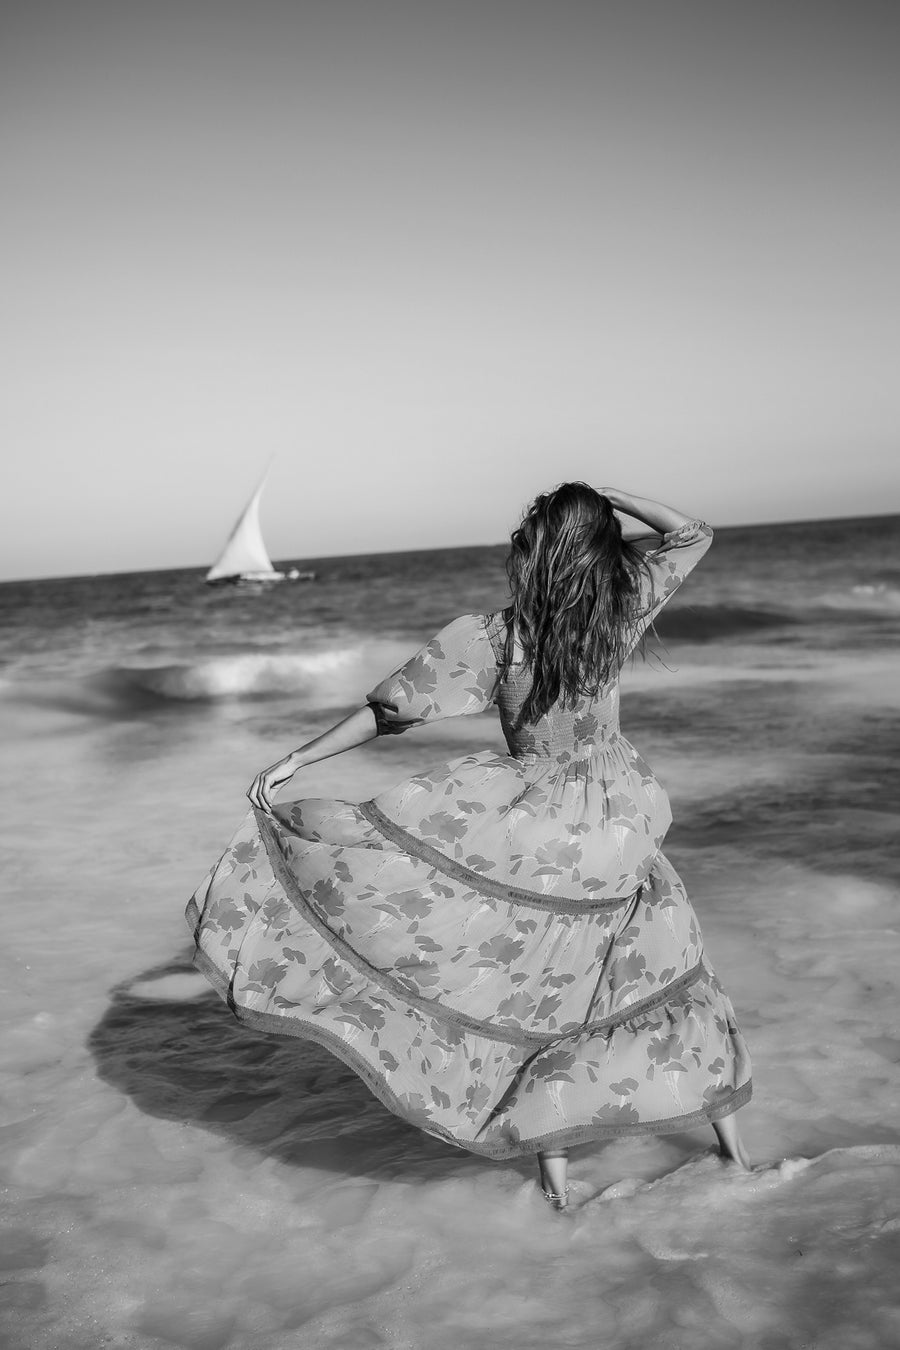 This is a black and white photo of a women wearing a long flowy dress at the beach.